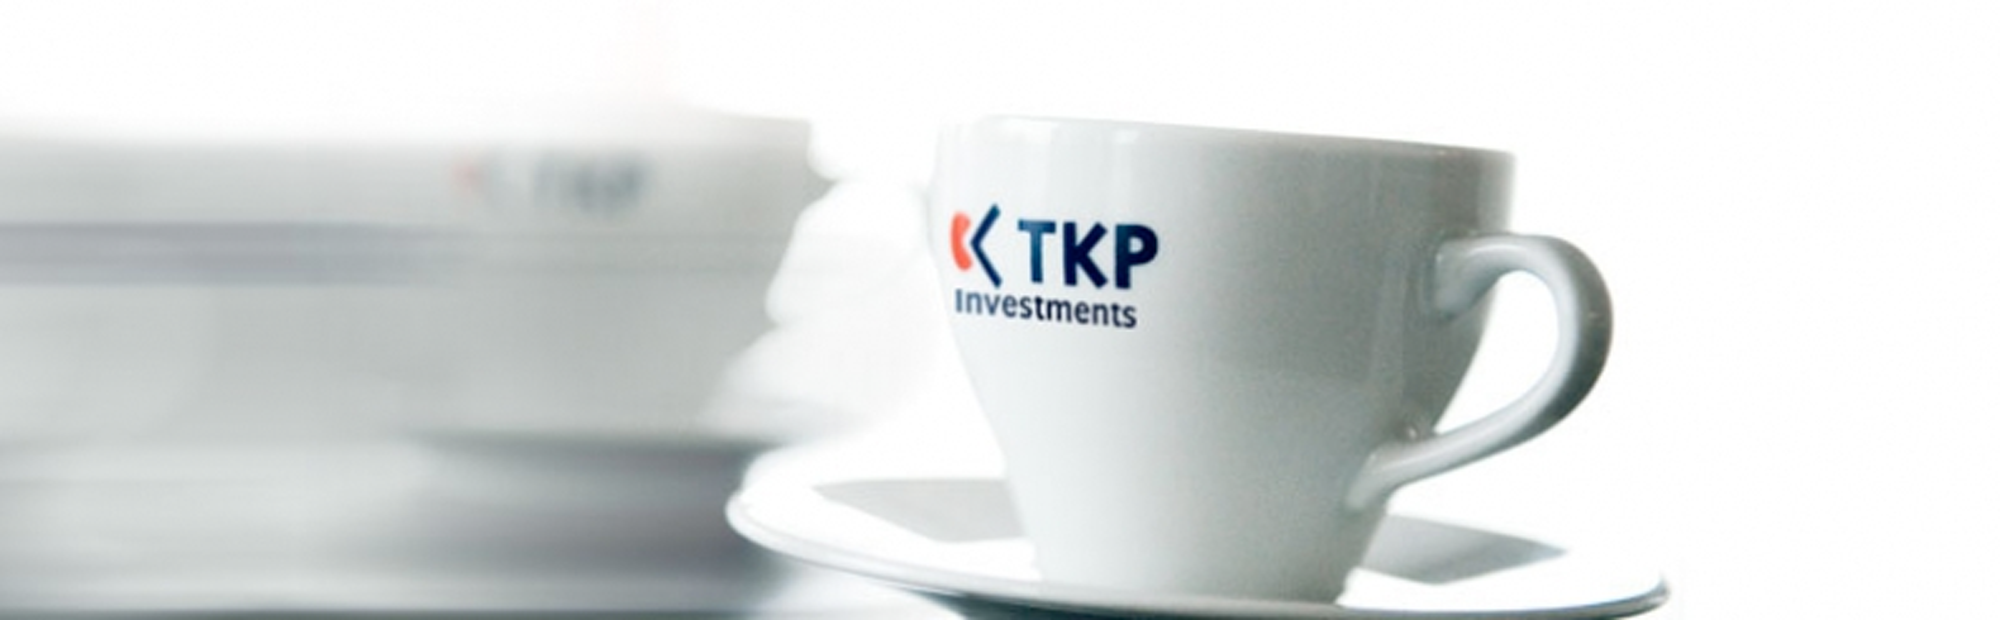 TKP Investments